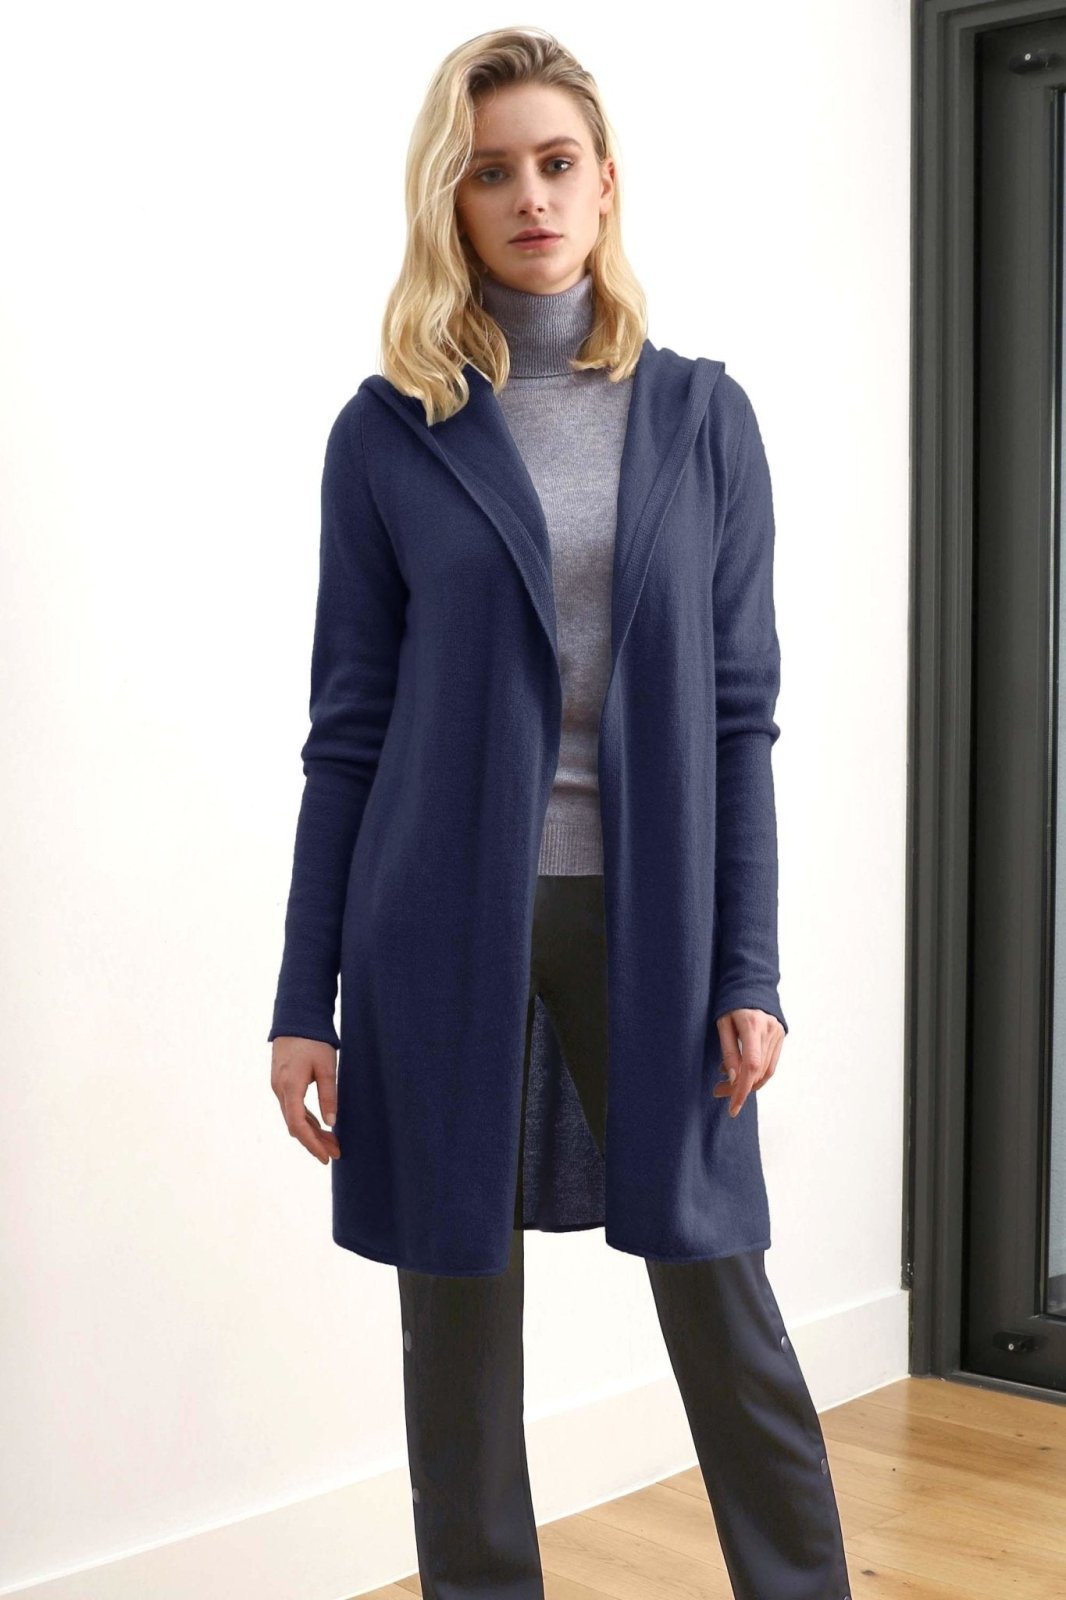 Long hooded cardigan, cashmere hoodie in navy - SEMON Cashmere